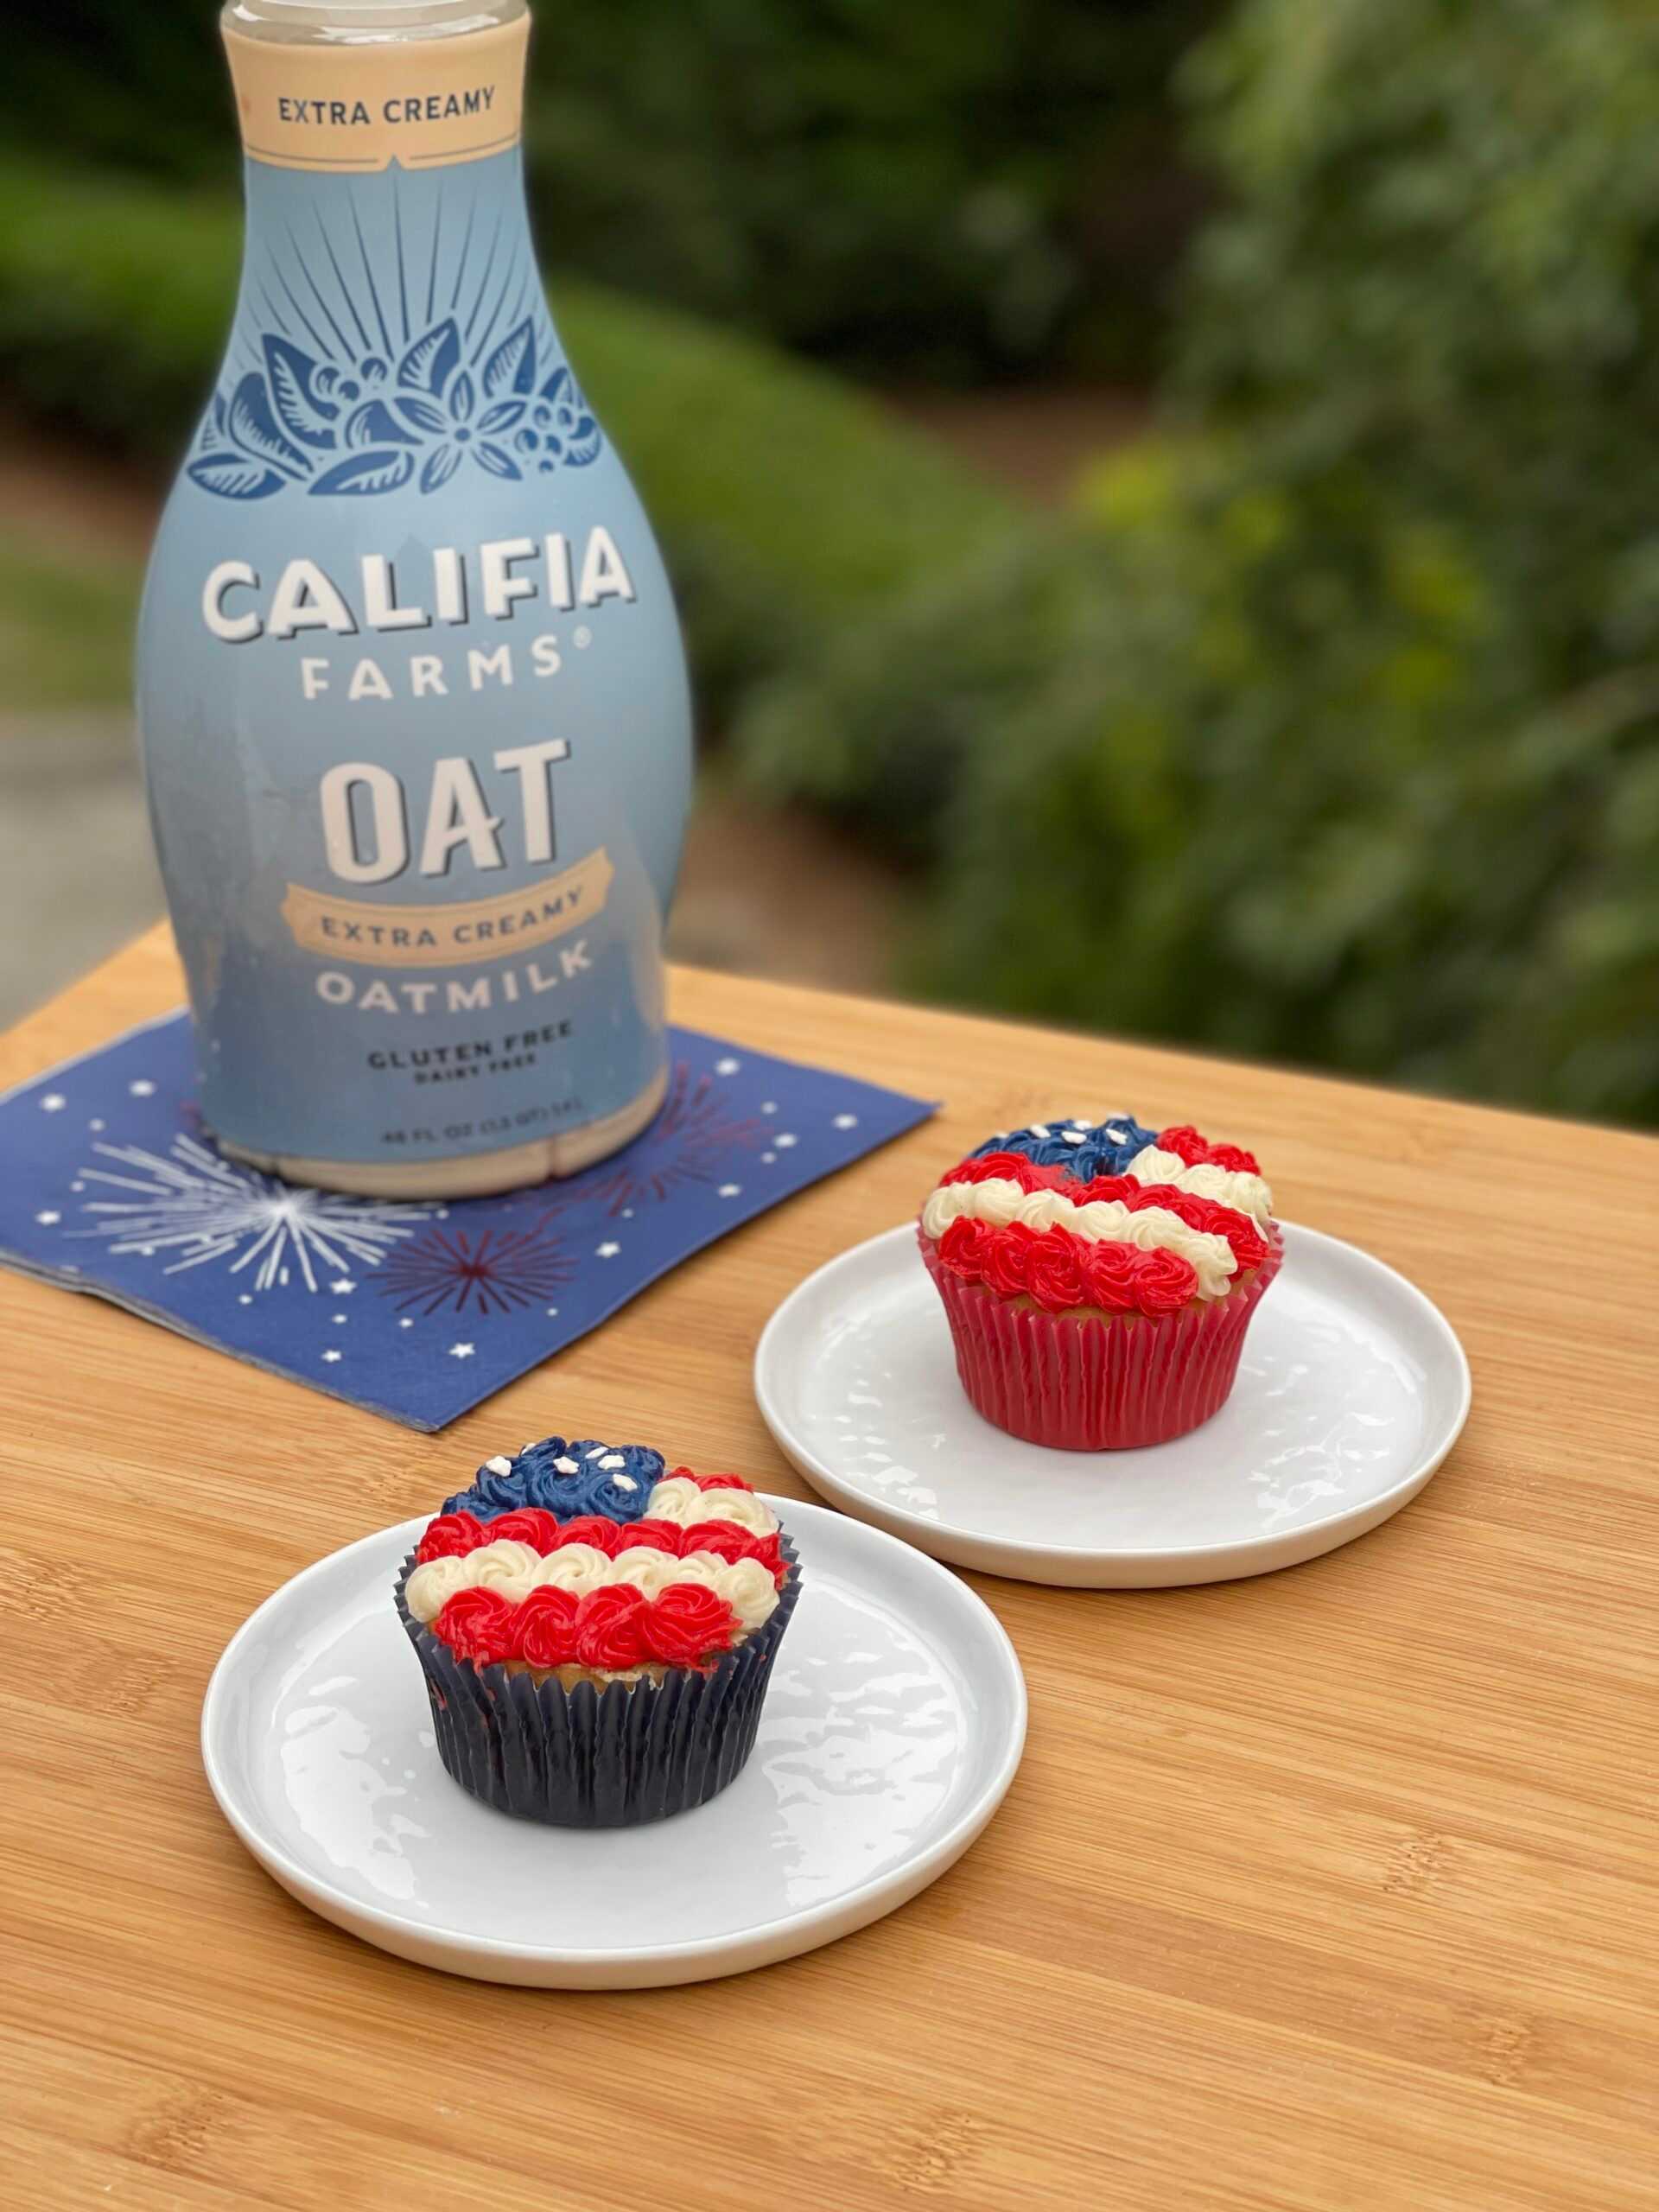 Two cupcakes decorated like the American flag sit at the center of the image, with Califia Farms Extra Creamy Oatmilk behind.